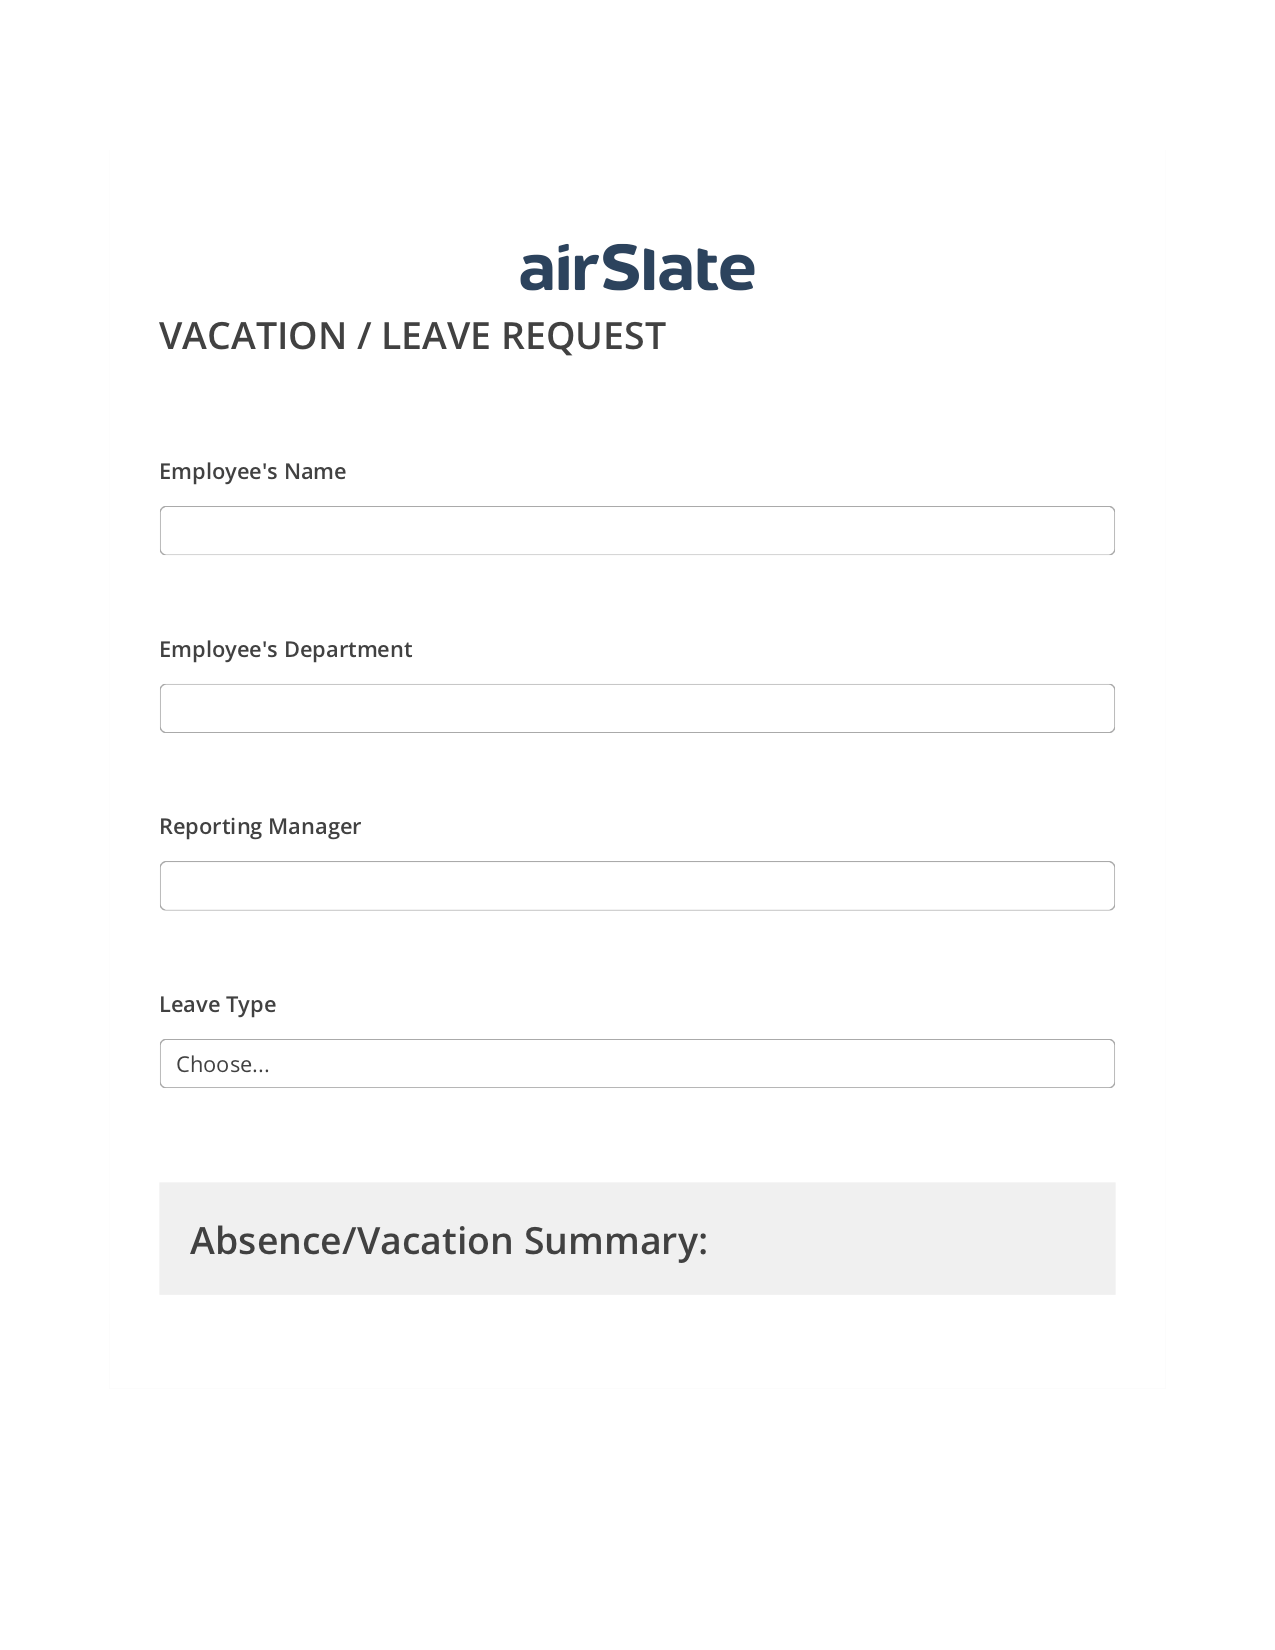 Multirole Vacation/Leave Request Workflow Pre-fill from Google Sheets Bot, Create slate from another Flow Bot, Export to WebMerge Bot